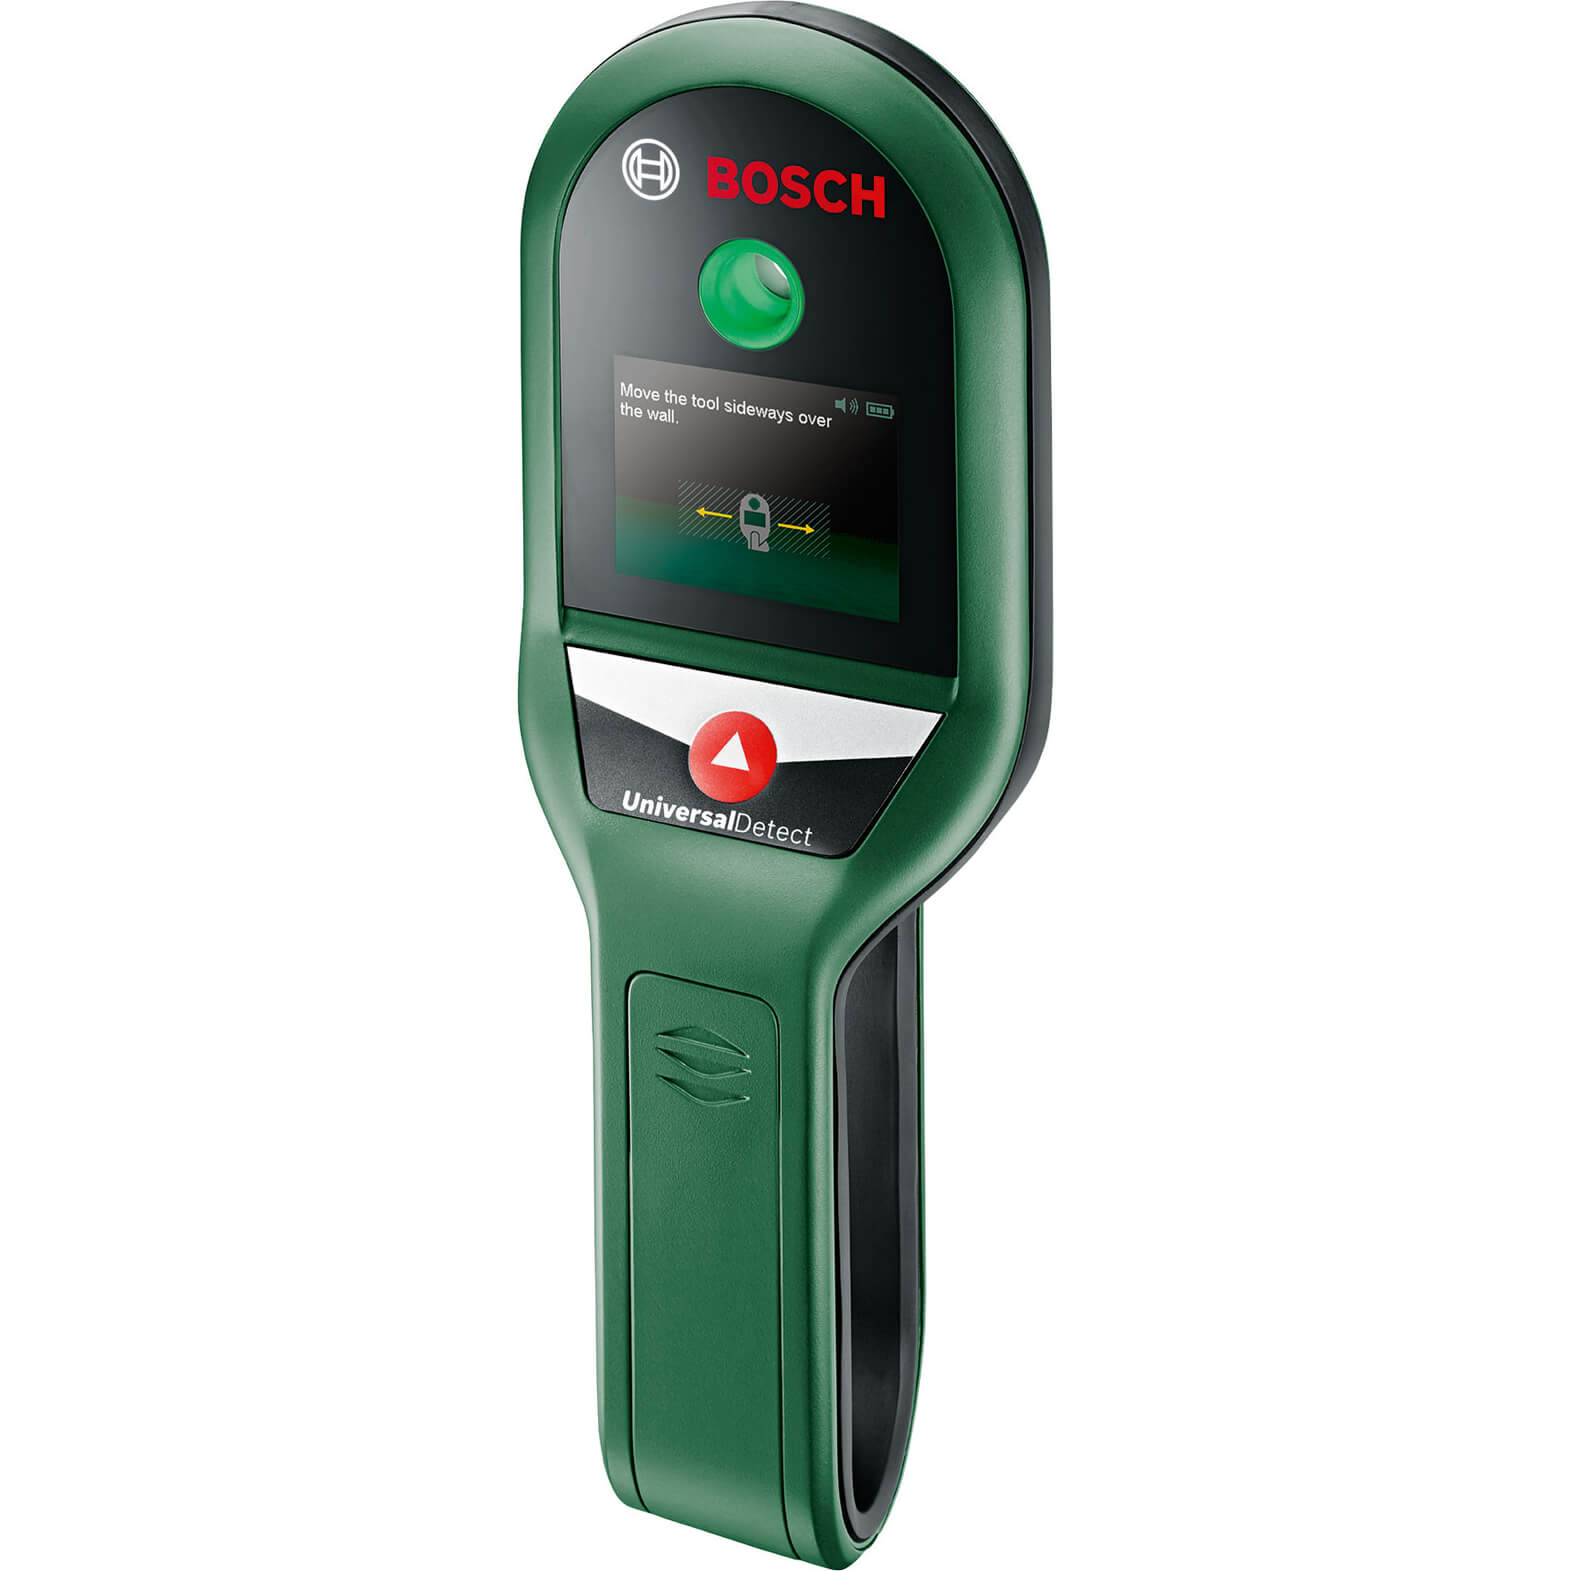 Bosch UNIVERSALDETECT Cable, Pipe and Wood Detector (New)